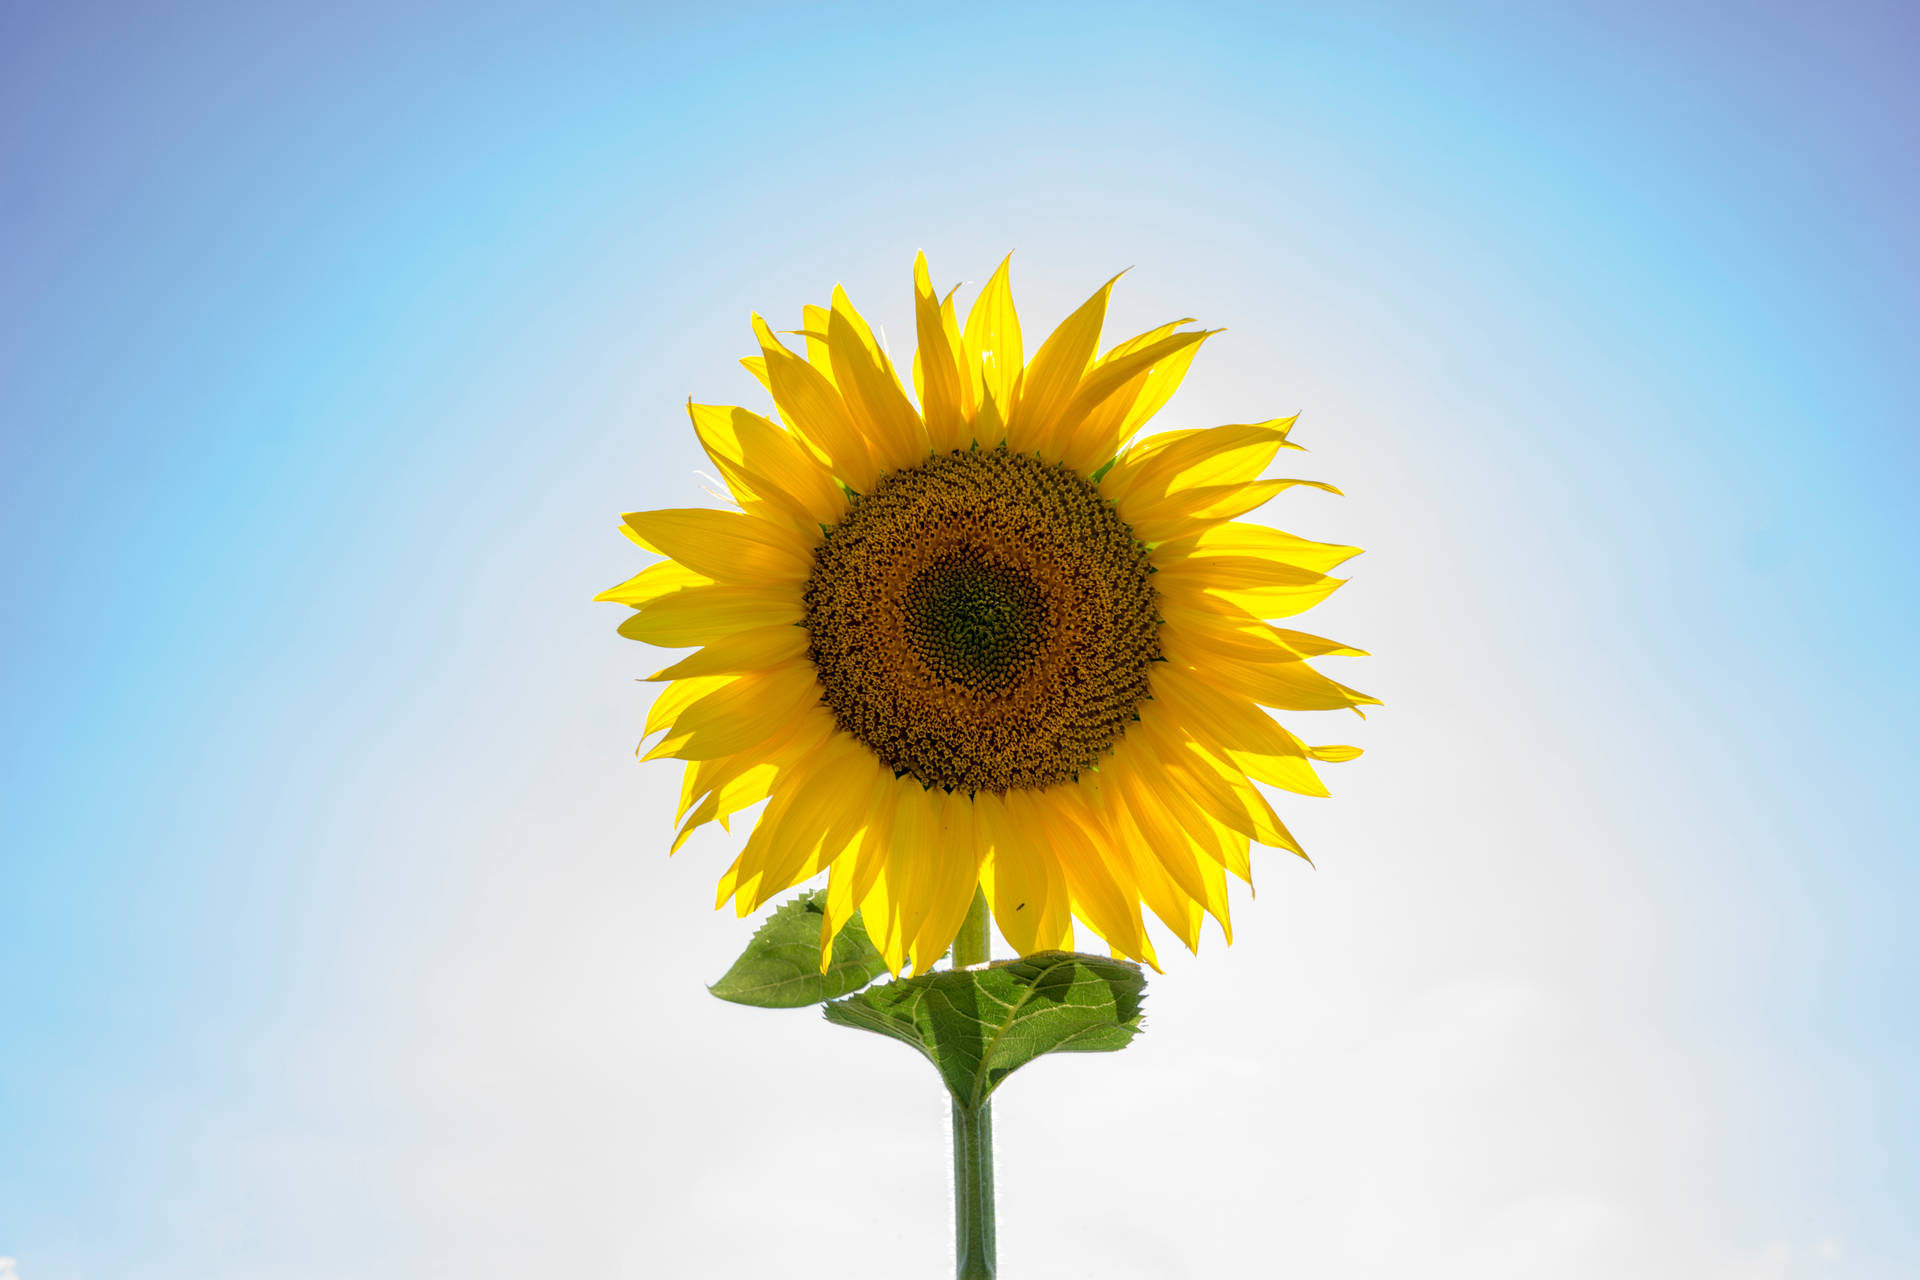 Sunflower 6000X4000 Wallpaper and Background Image